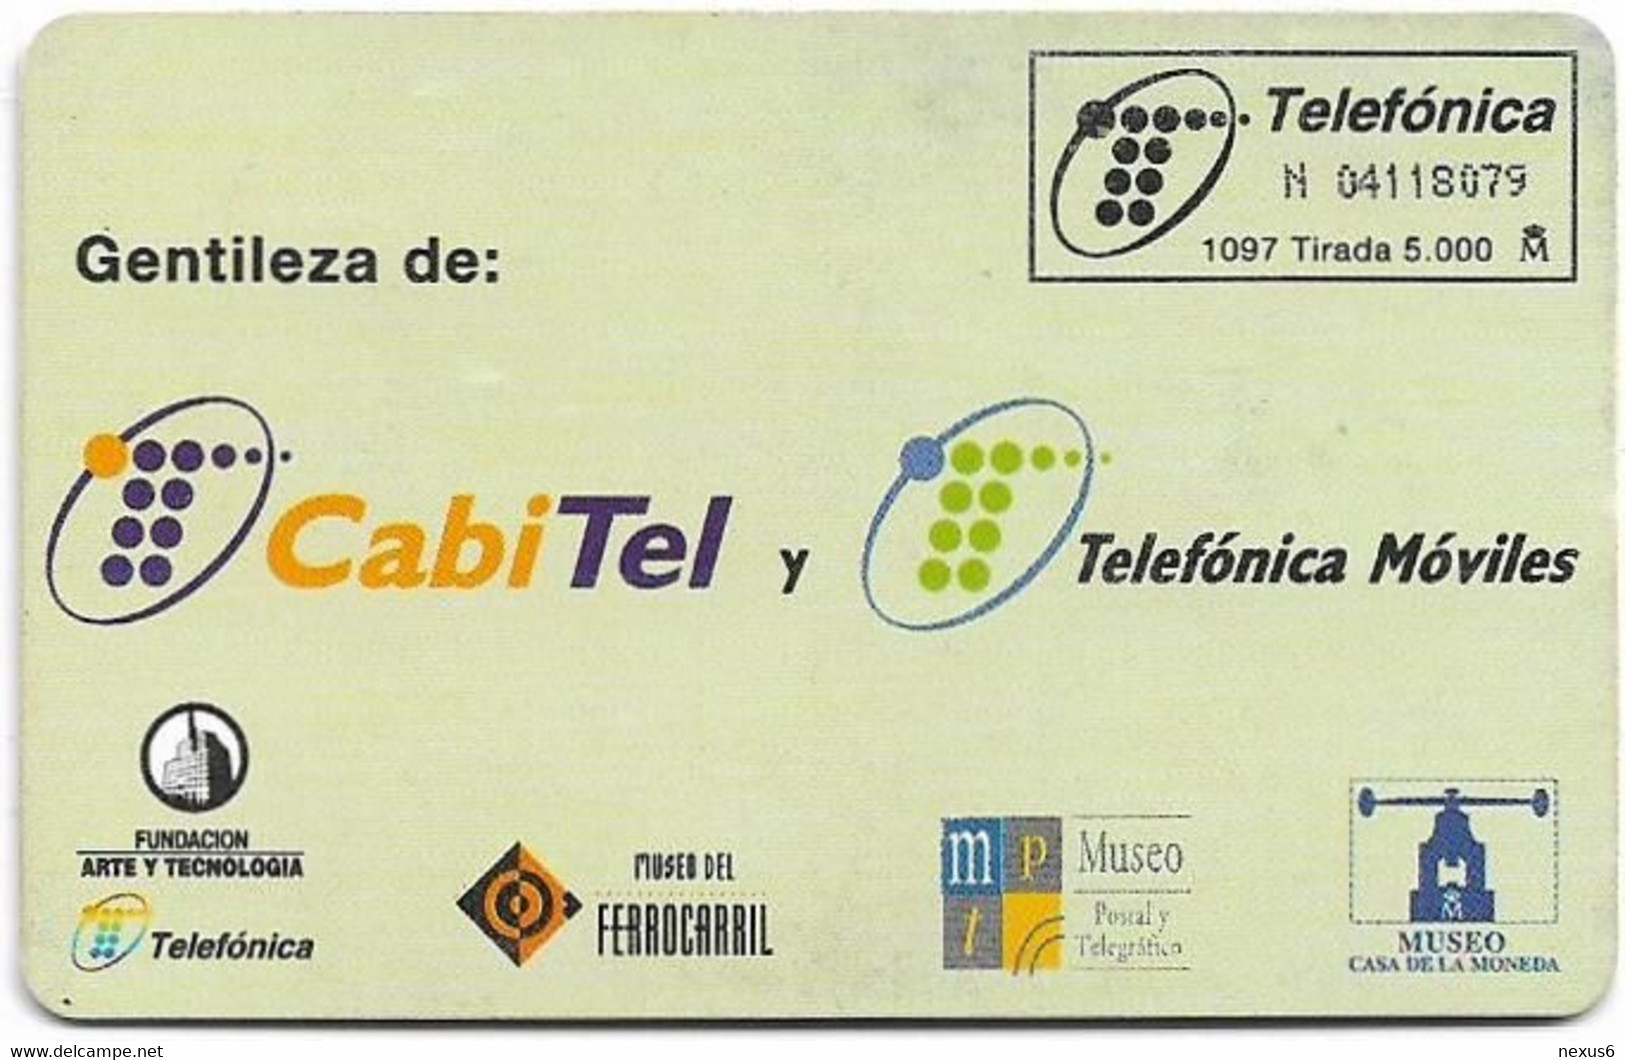 Spain - Telefónica - A.im.t.c. - G-014 - 10.1997, 500PTA, 5.000ex, Used - Gift Issues